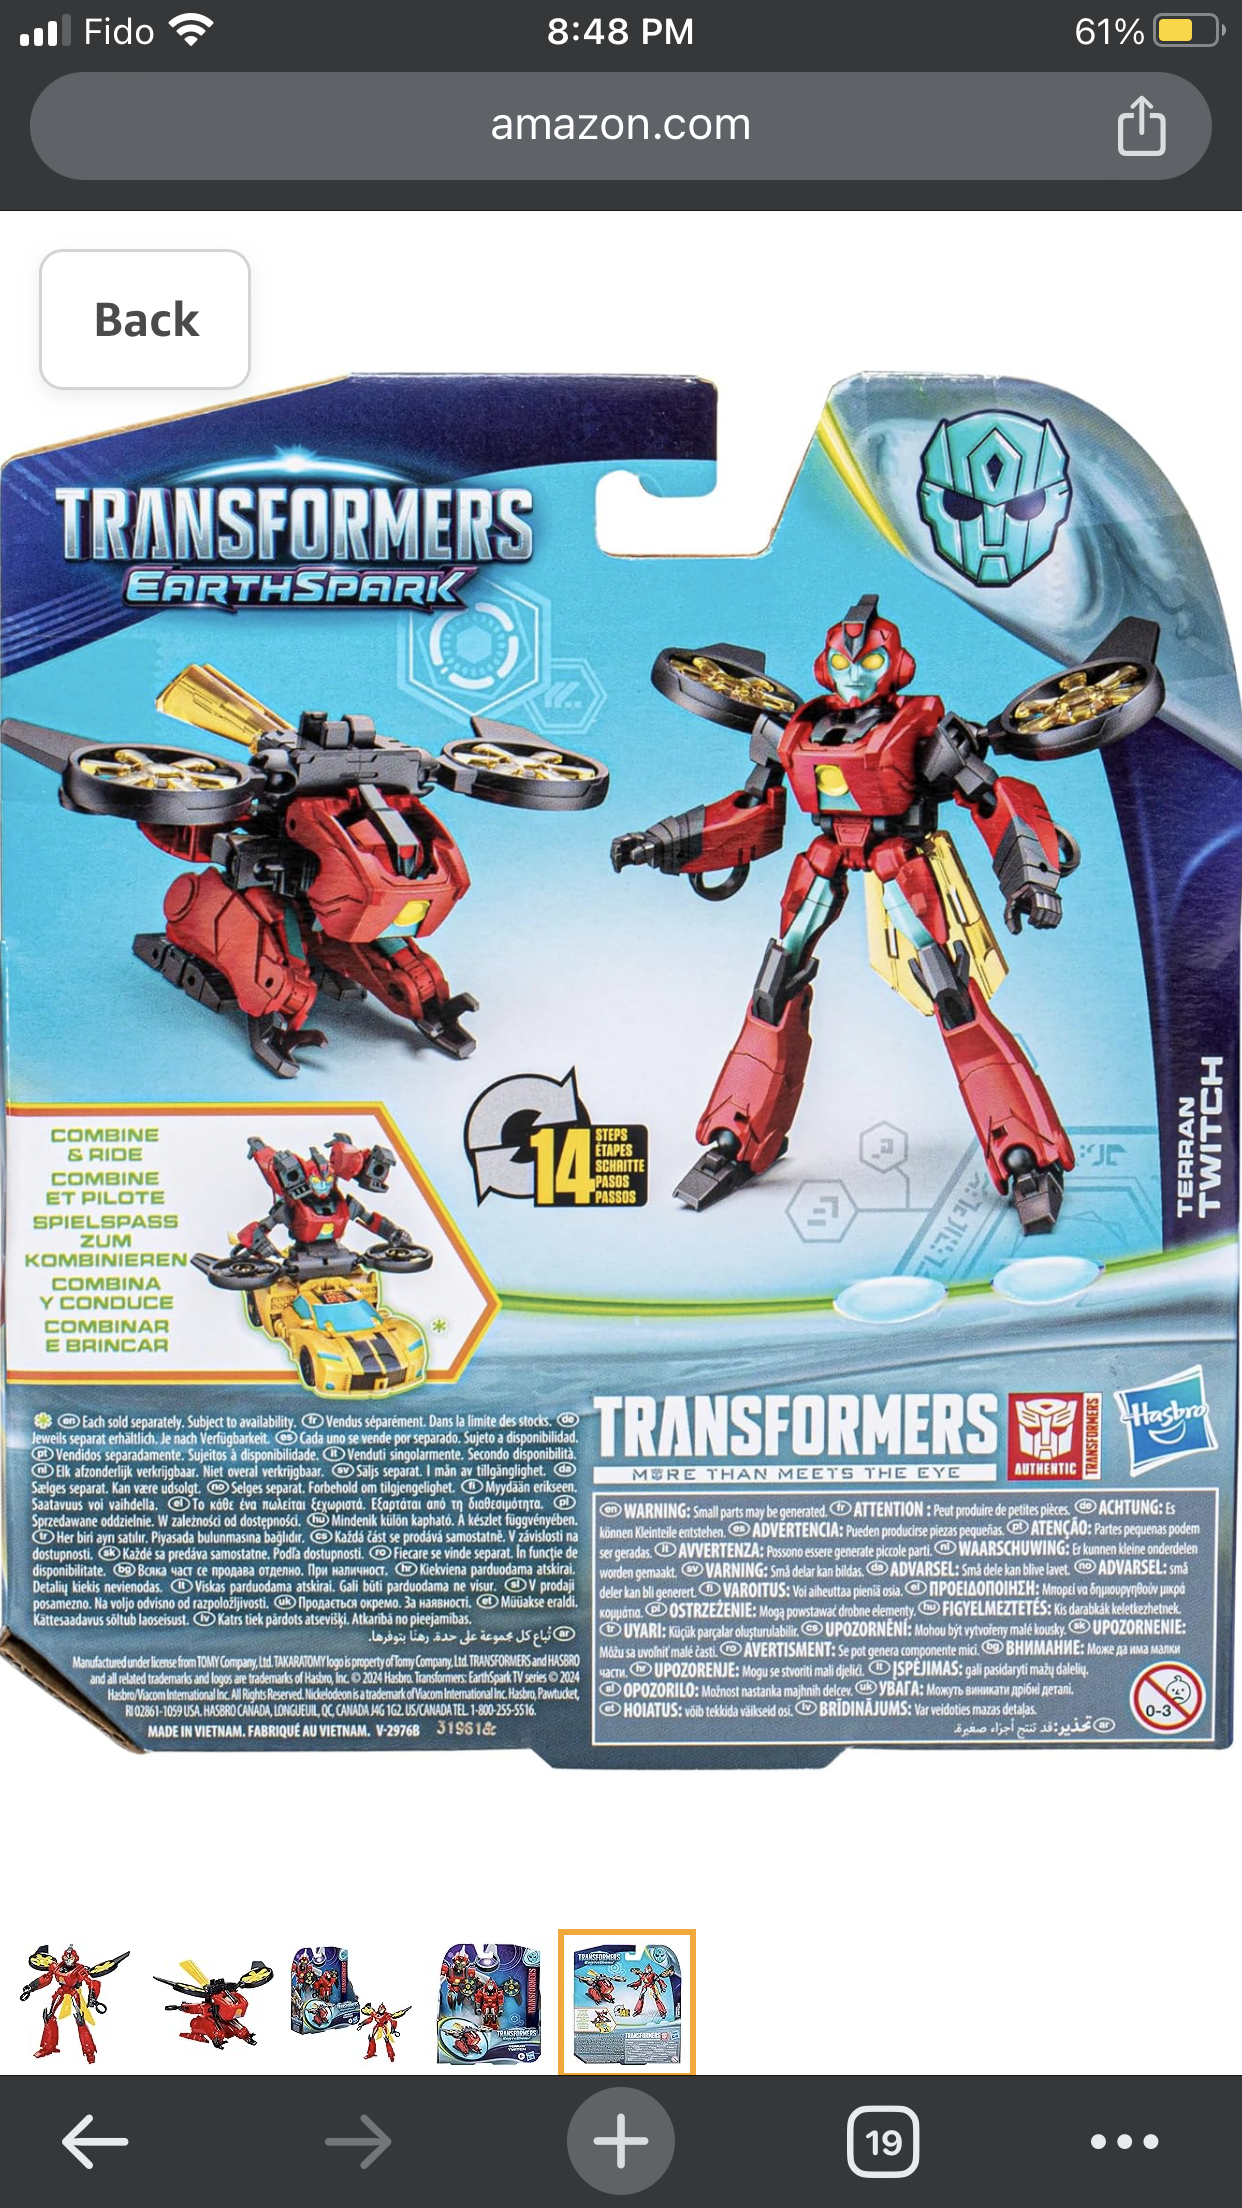 Transformers News: Earthspark Warrior Class News: Sightings, Wave Contents and Image of Combine and Ride Gimmick